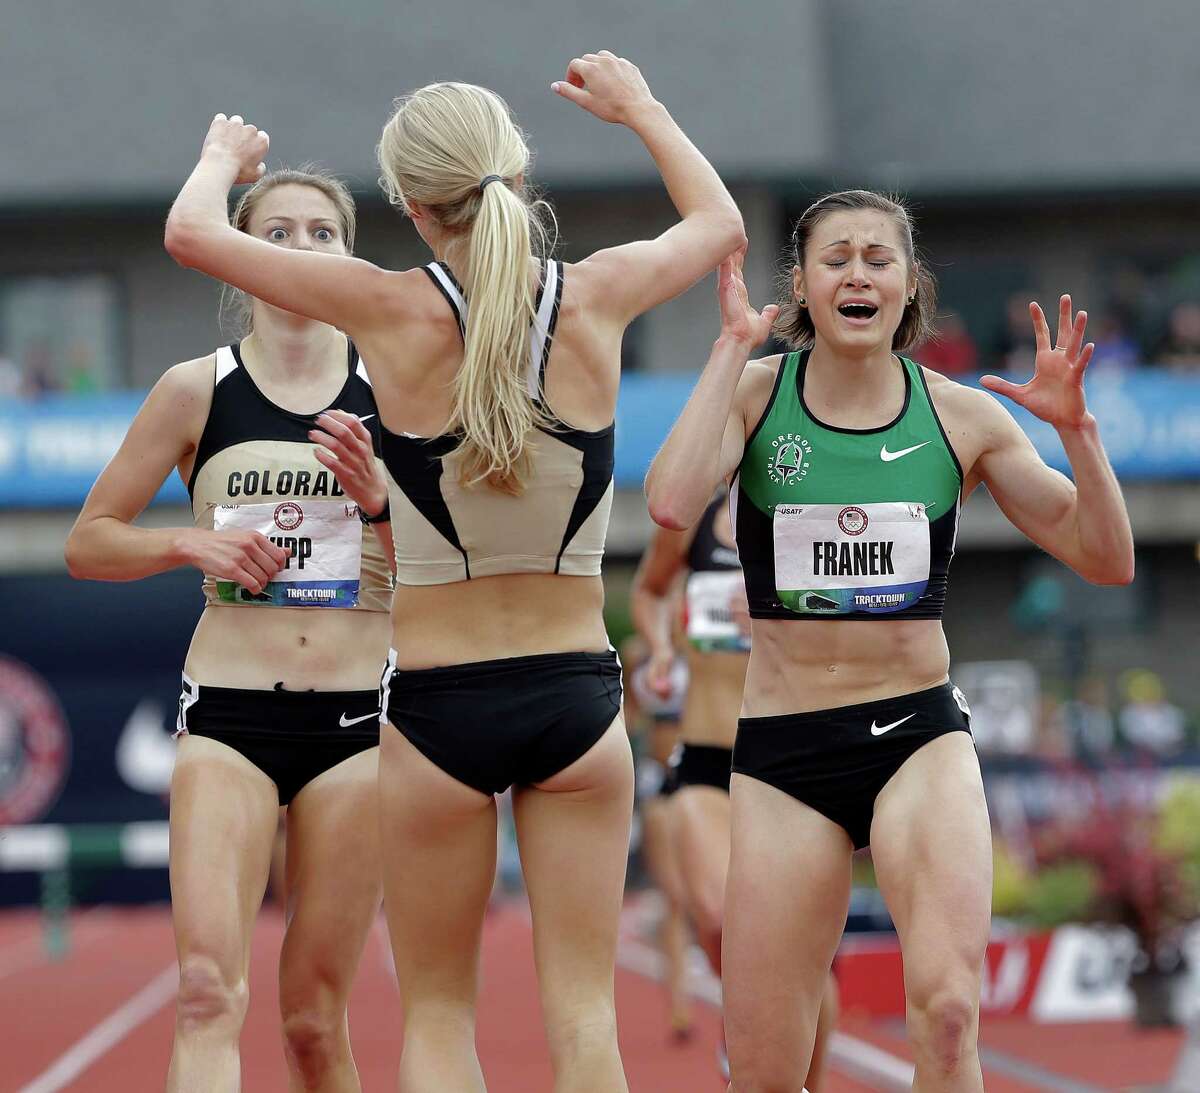 Shalaya Kipp, left, Bridget Franek, right, and Emma Coburn celebrate advancing to the Olympics after finishing the women's 3000 meter steeplechase at the U.S. Olympic Track and Field Trials Friday, June 29, 2012, in Eugene, Ore.(AP Photo/Eric Gay)